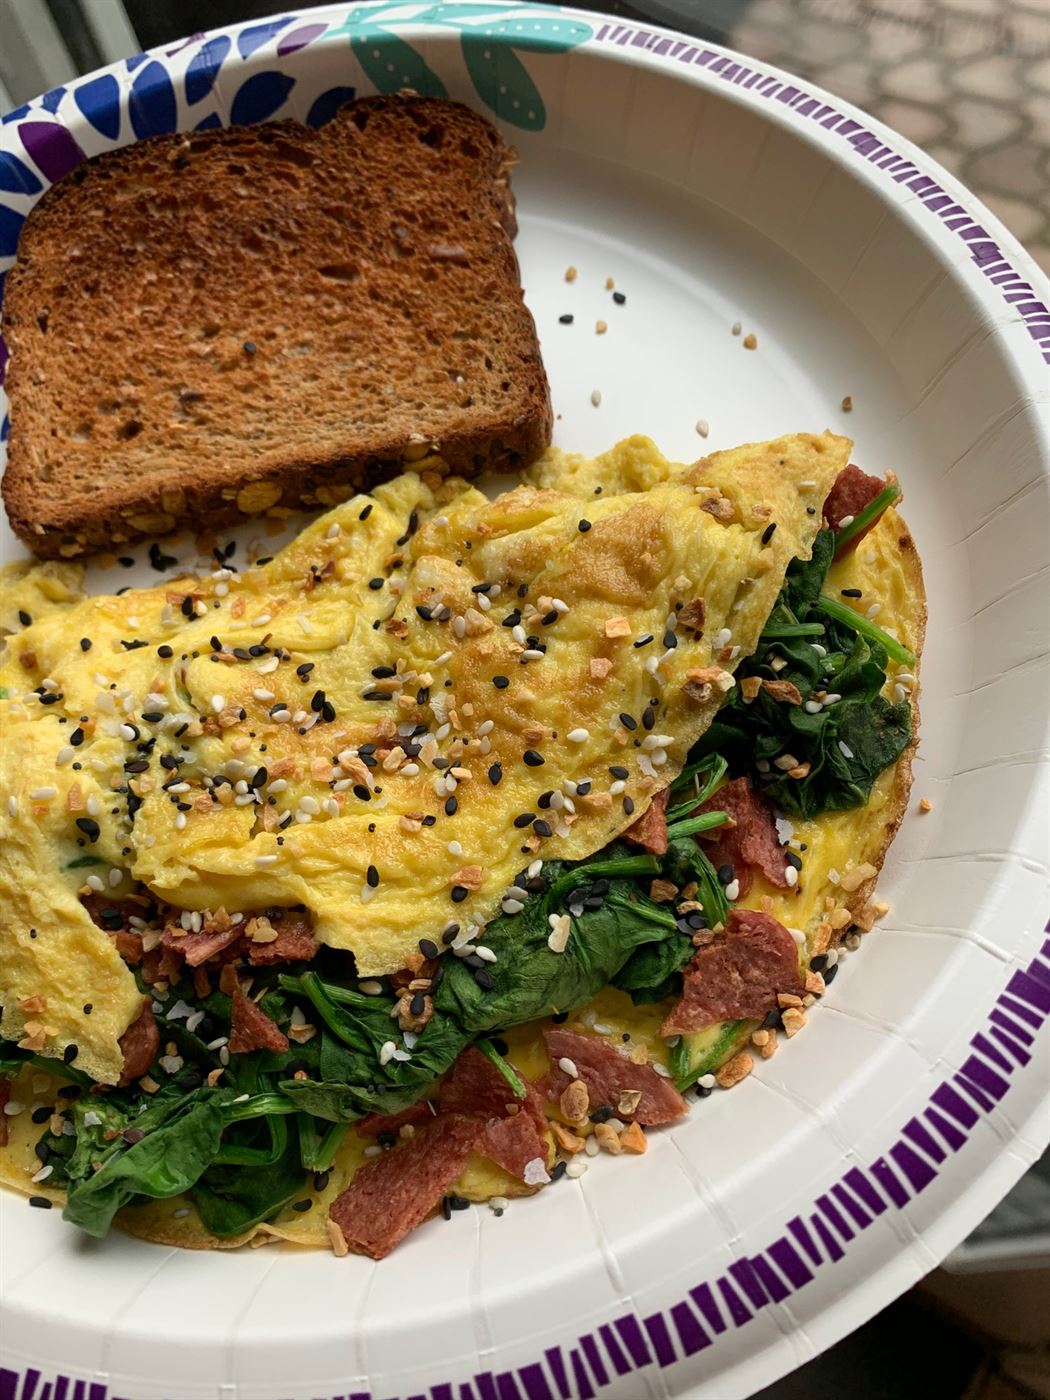 A staple in my kitchen for any meal is a well-filled, egg omelet and toast. Samantha bailey | The Montclarion